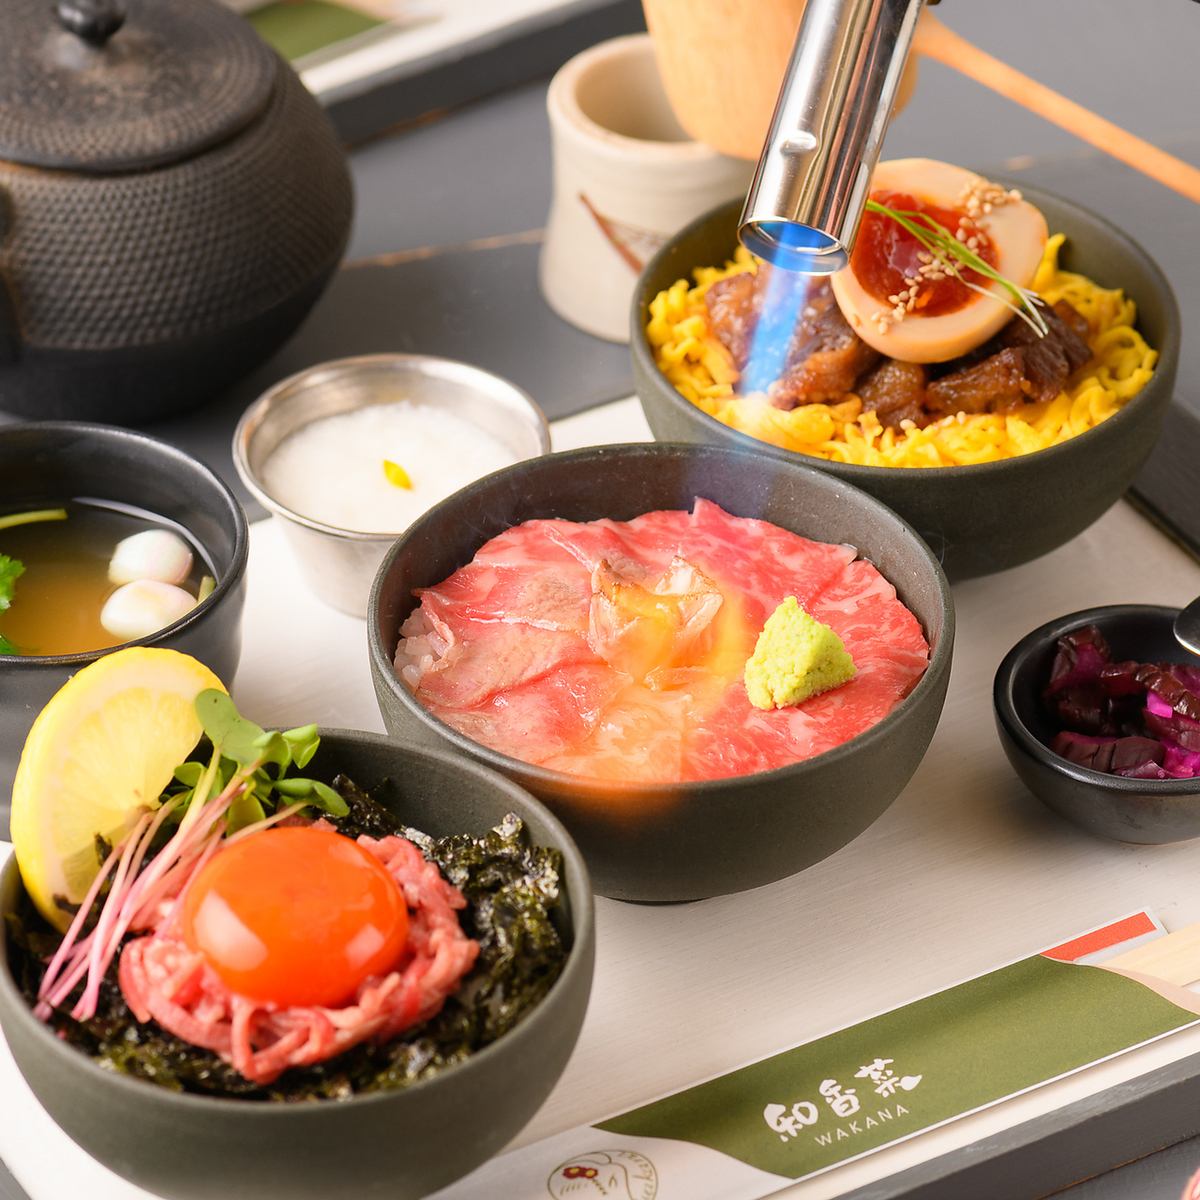 Enjoy a luxurious lunch featuring A5 rank Japanese black beef.